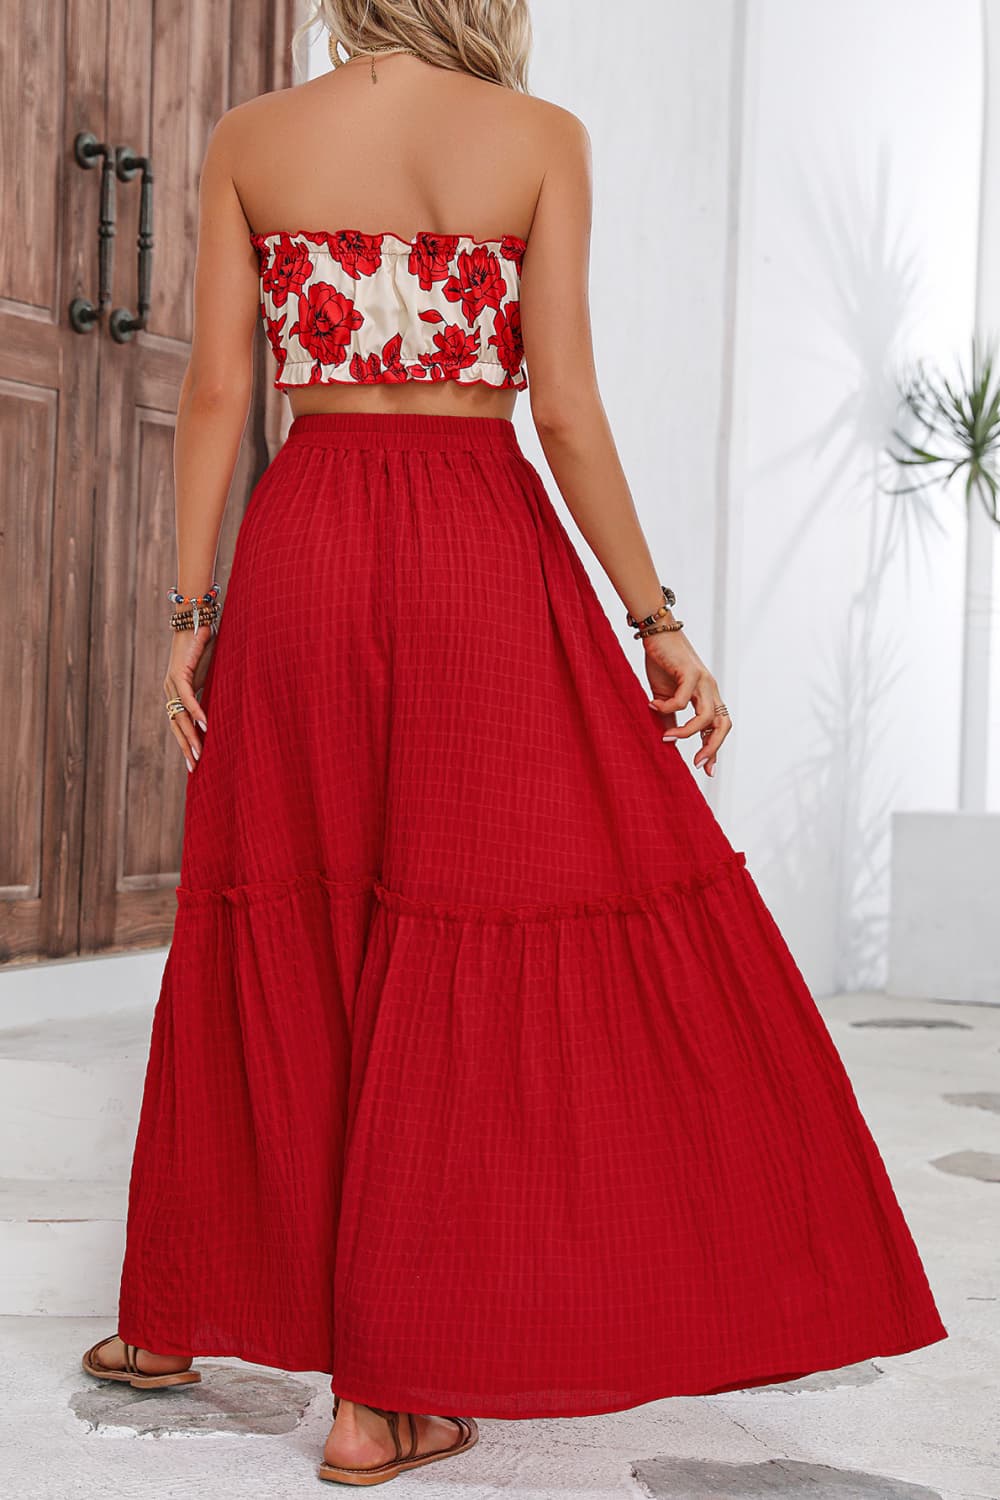 Floral Tube Top and Maxi Skirt Set - p9nstyle